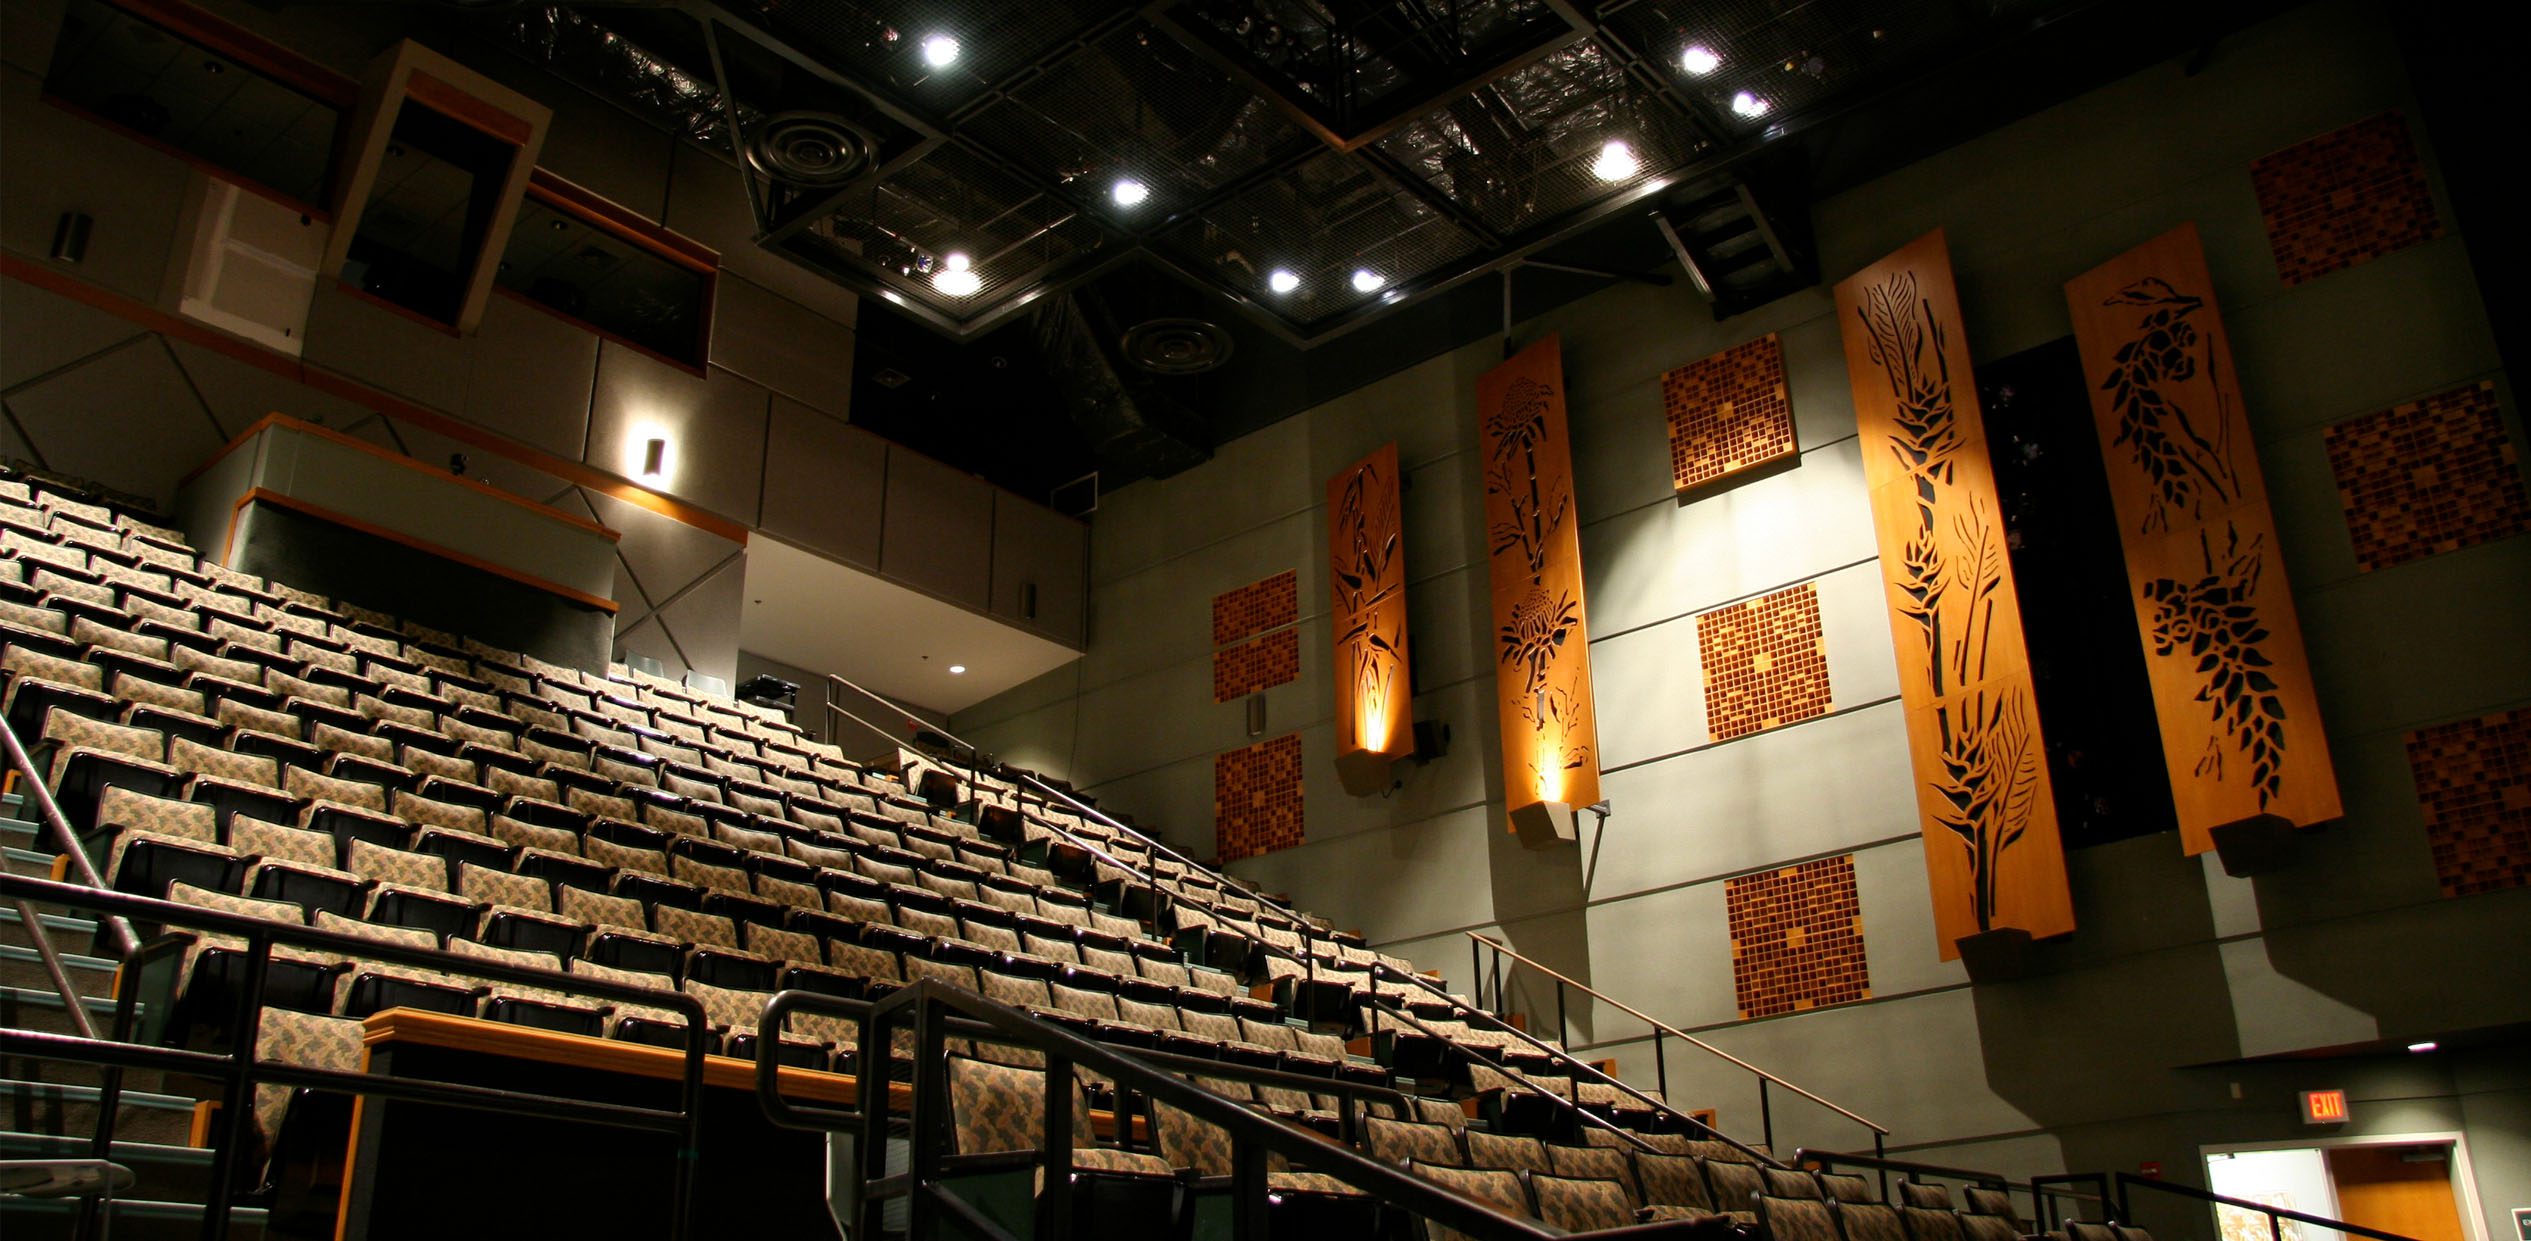 view from Palikū theatre stage looking up at the seats and decor